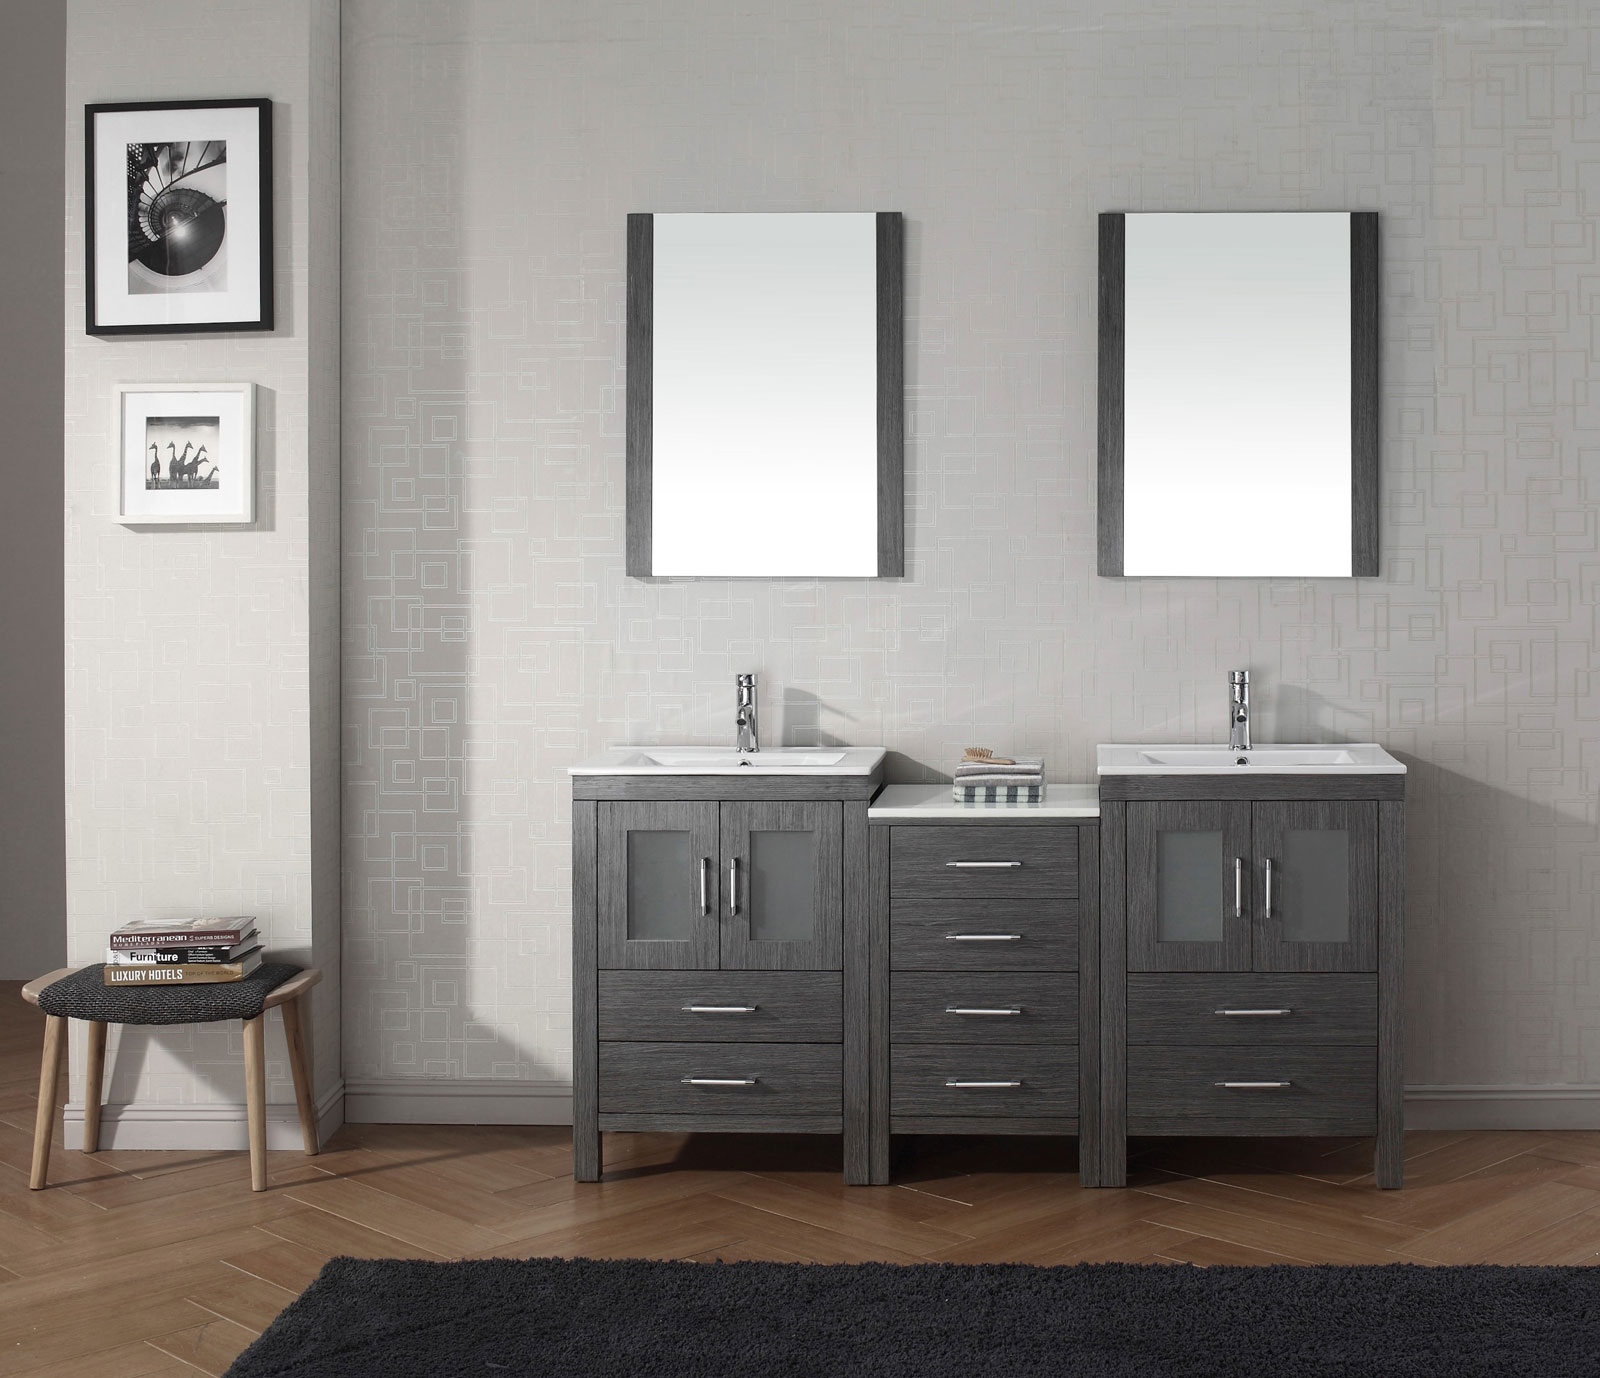 Contemporary Bathroom Color Amazing Contemporary Bathroom Applying Grey Color Ideas With Wooden Vanity Drawers Completed By Bathroom Fixtures And Coupled By Double Sink Furnished With Mirror Bathroom Decorating Bathroom With Bathroom Fixtures